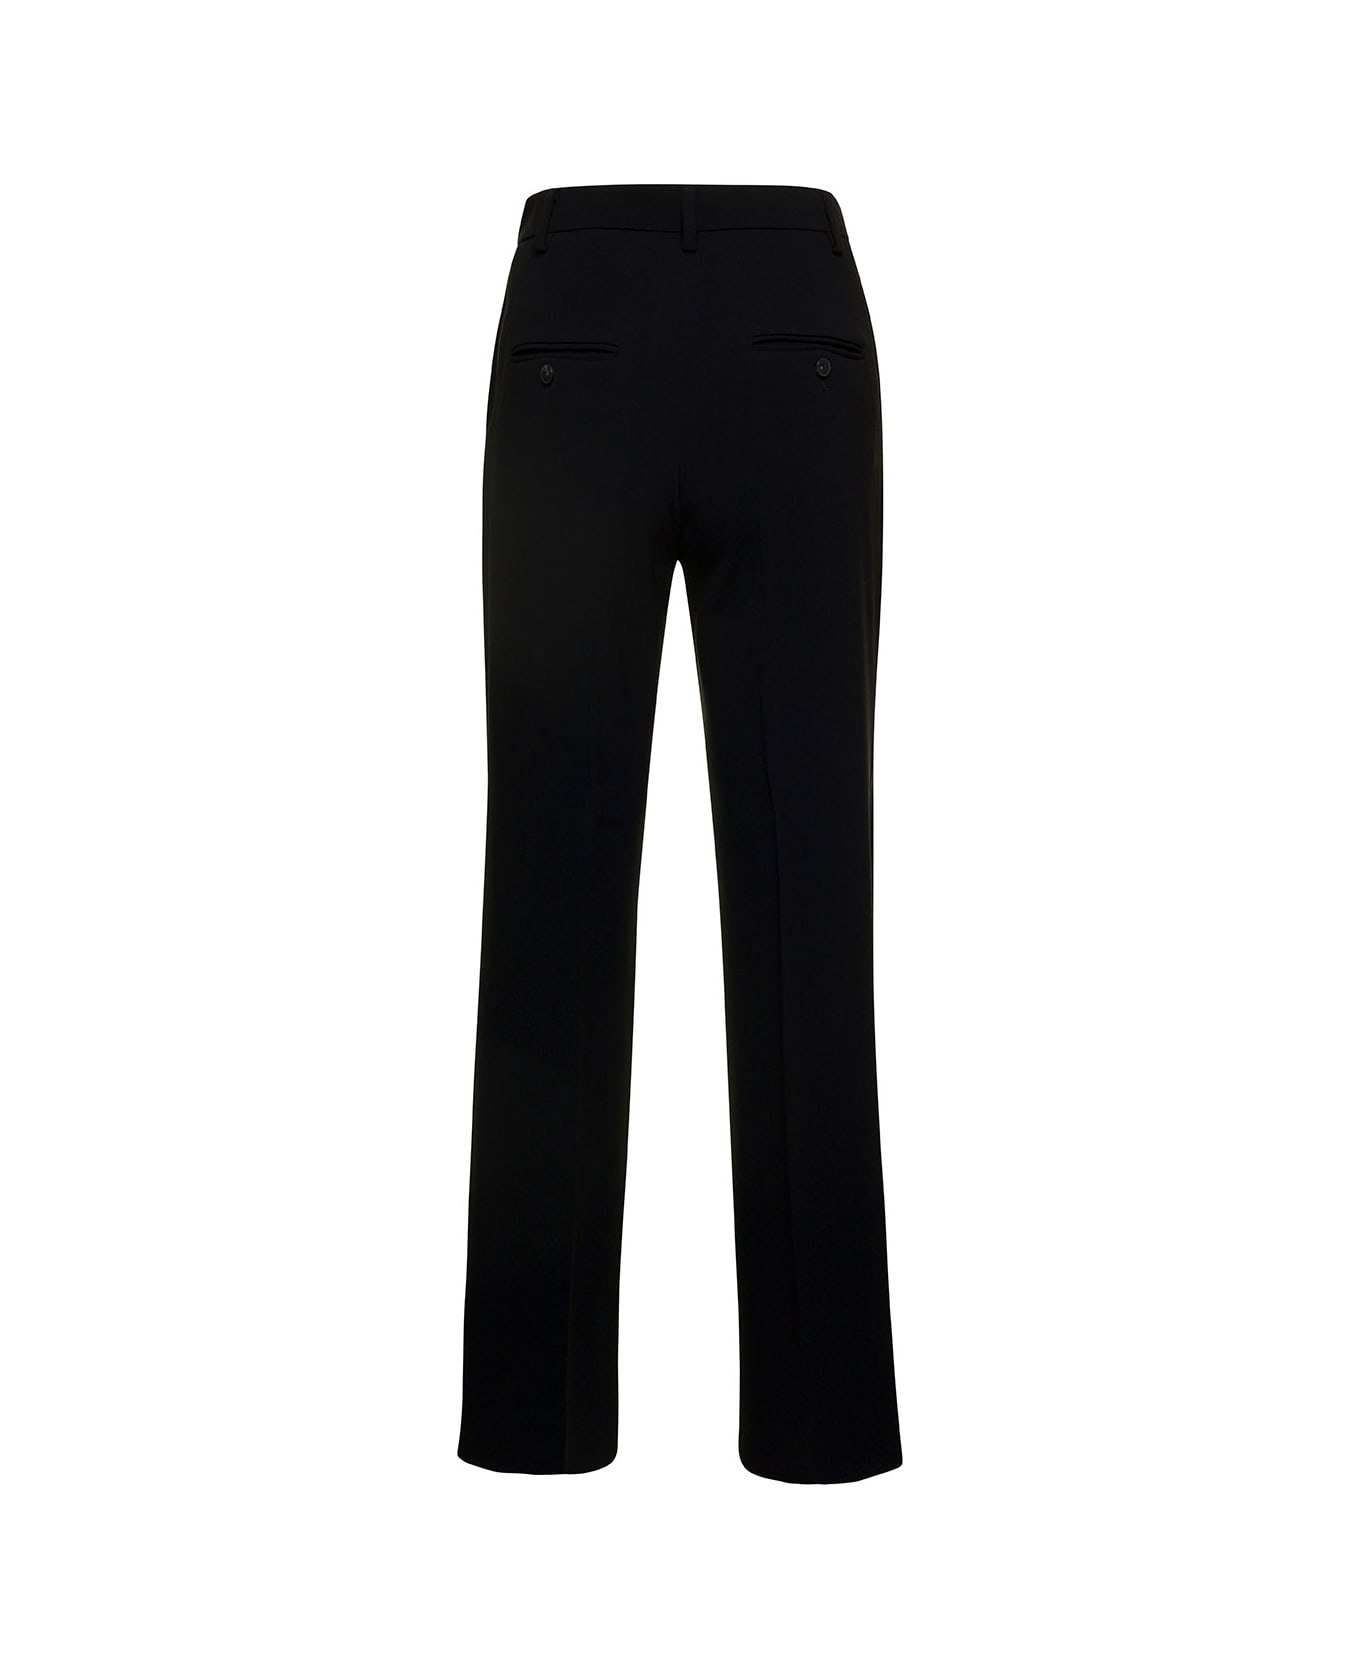 Alberto Biani Black Flared Pants With Welt Pockets In Triacetate Blend Woman - Black